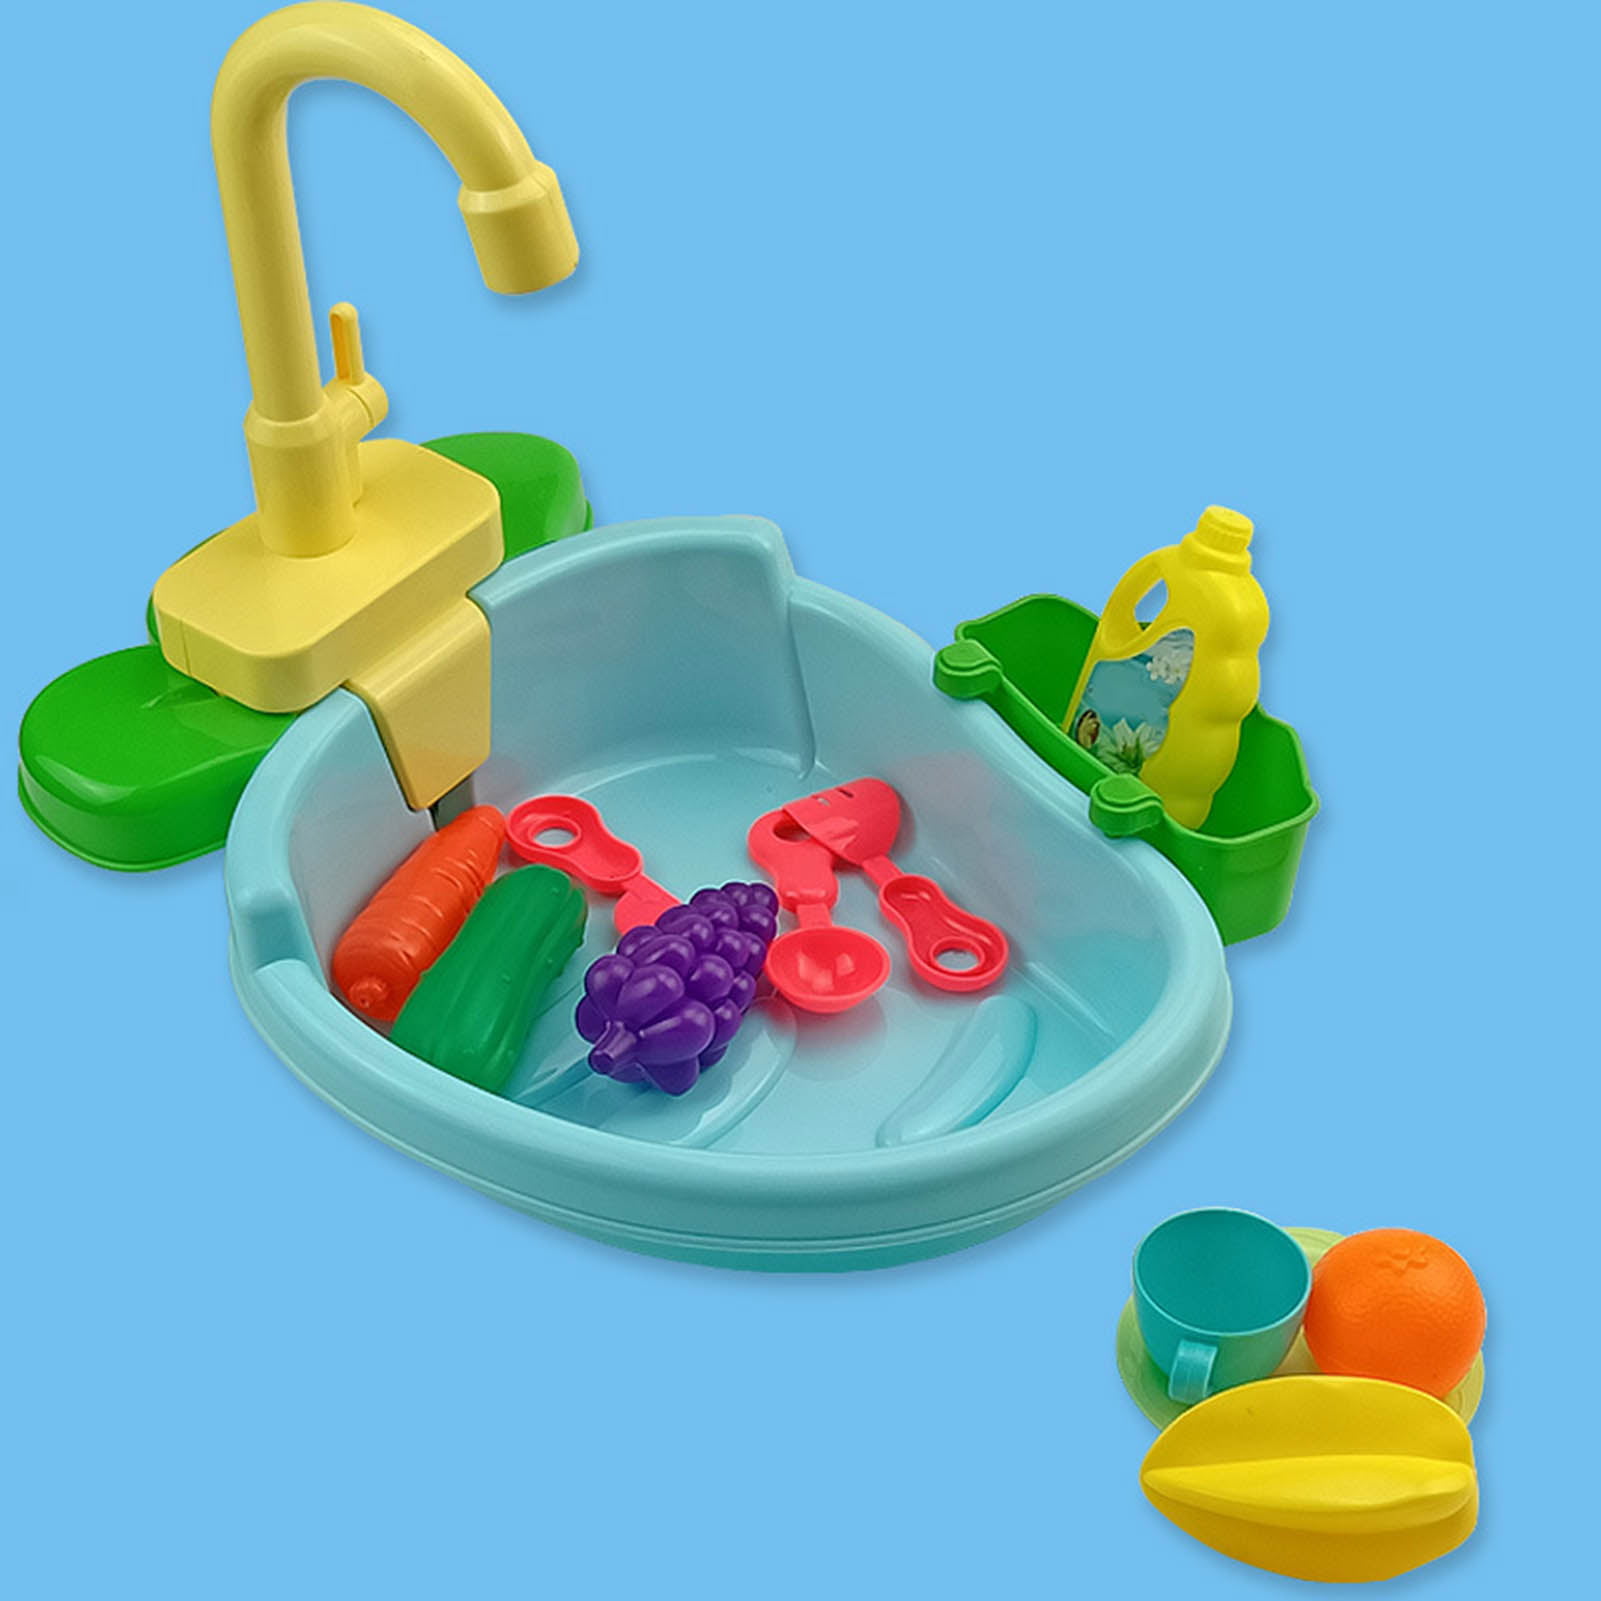 Spring Park Kitchen Play Sink Toy, Bathtub Water Faucet Toy